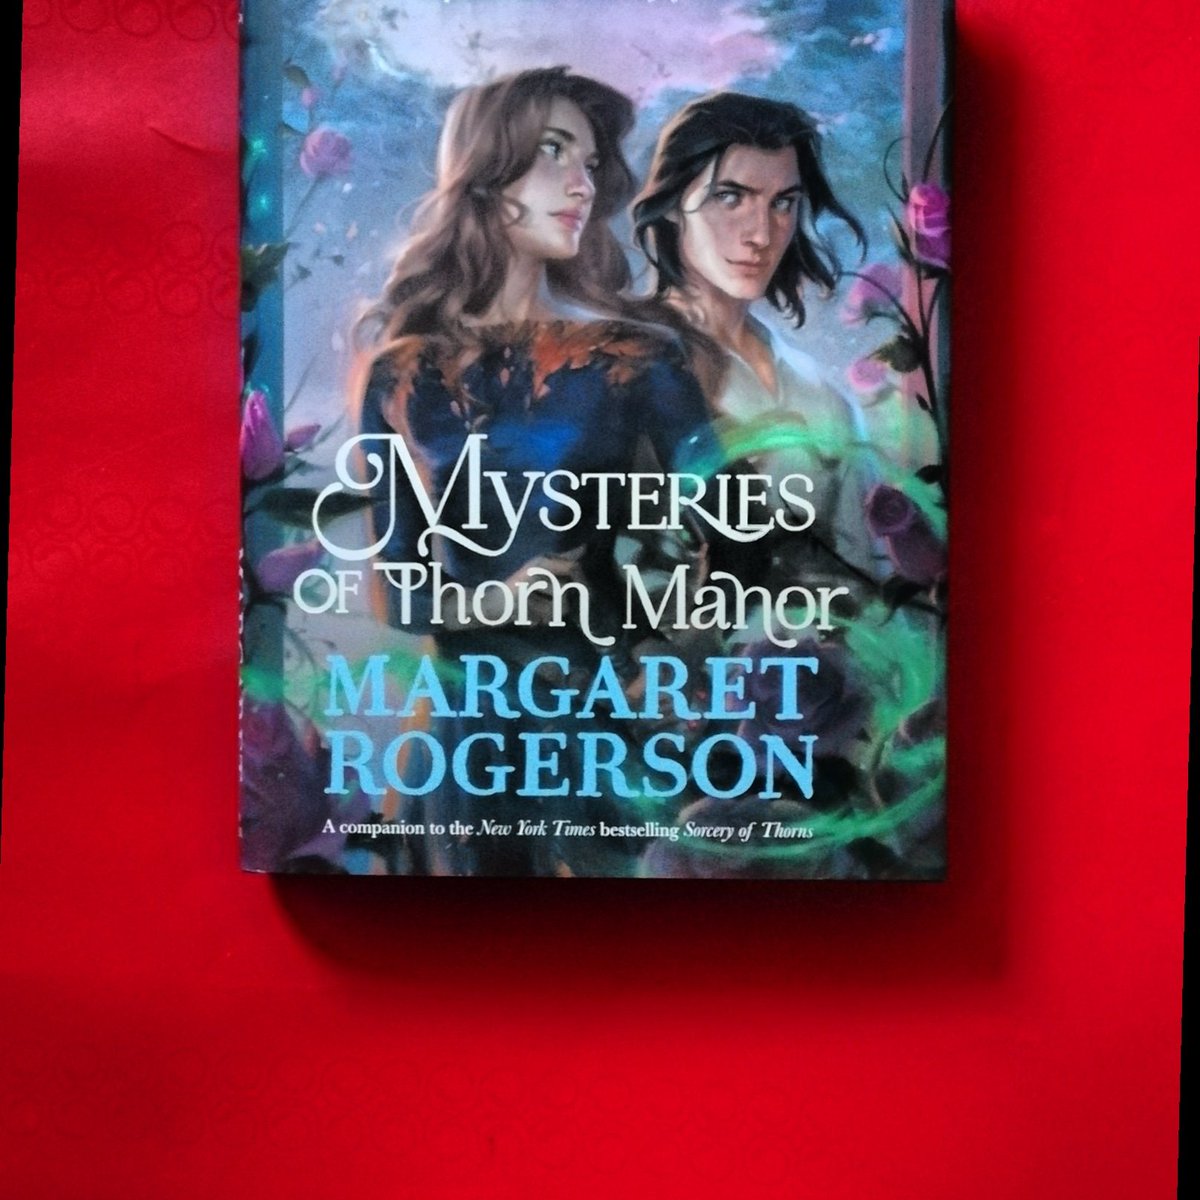 #mysteriesofthornmanor
Margaret Rogerson @simonkids_UK #yalit I ABSOLUTELY LOVED Sorcery of Thorns & can't wait to re-enter the world of Elizabeth, Nathaniel & Silas.Can they unravel the magical trap keeping them inside Thorn Manor in time for their Midwinter Ball?